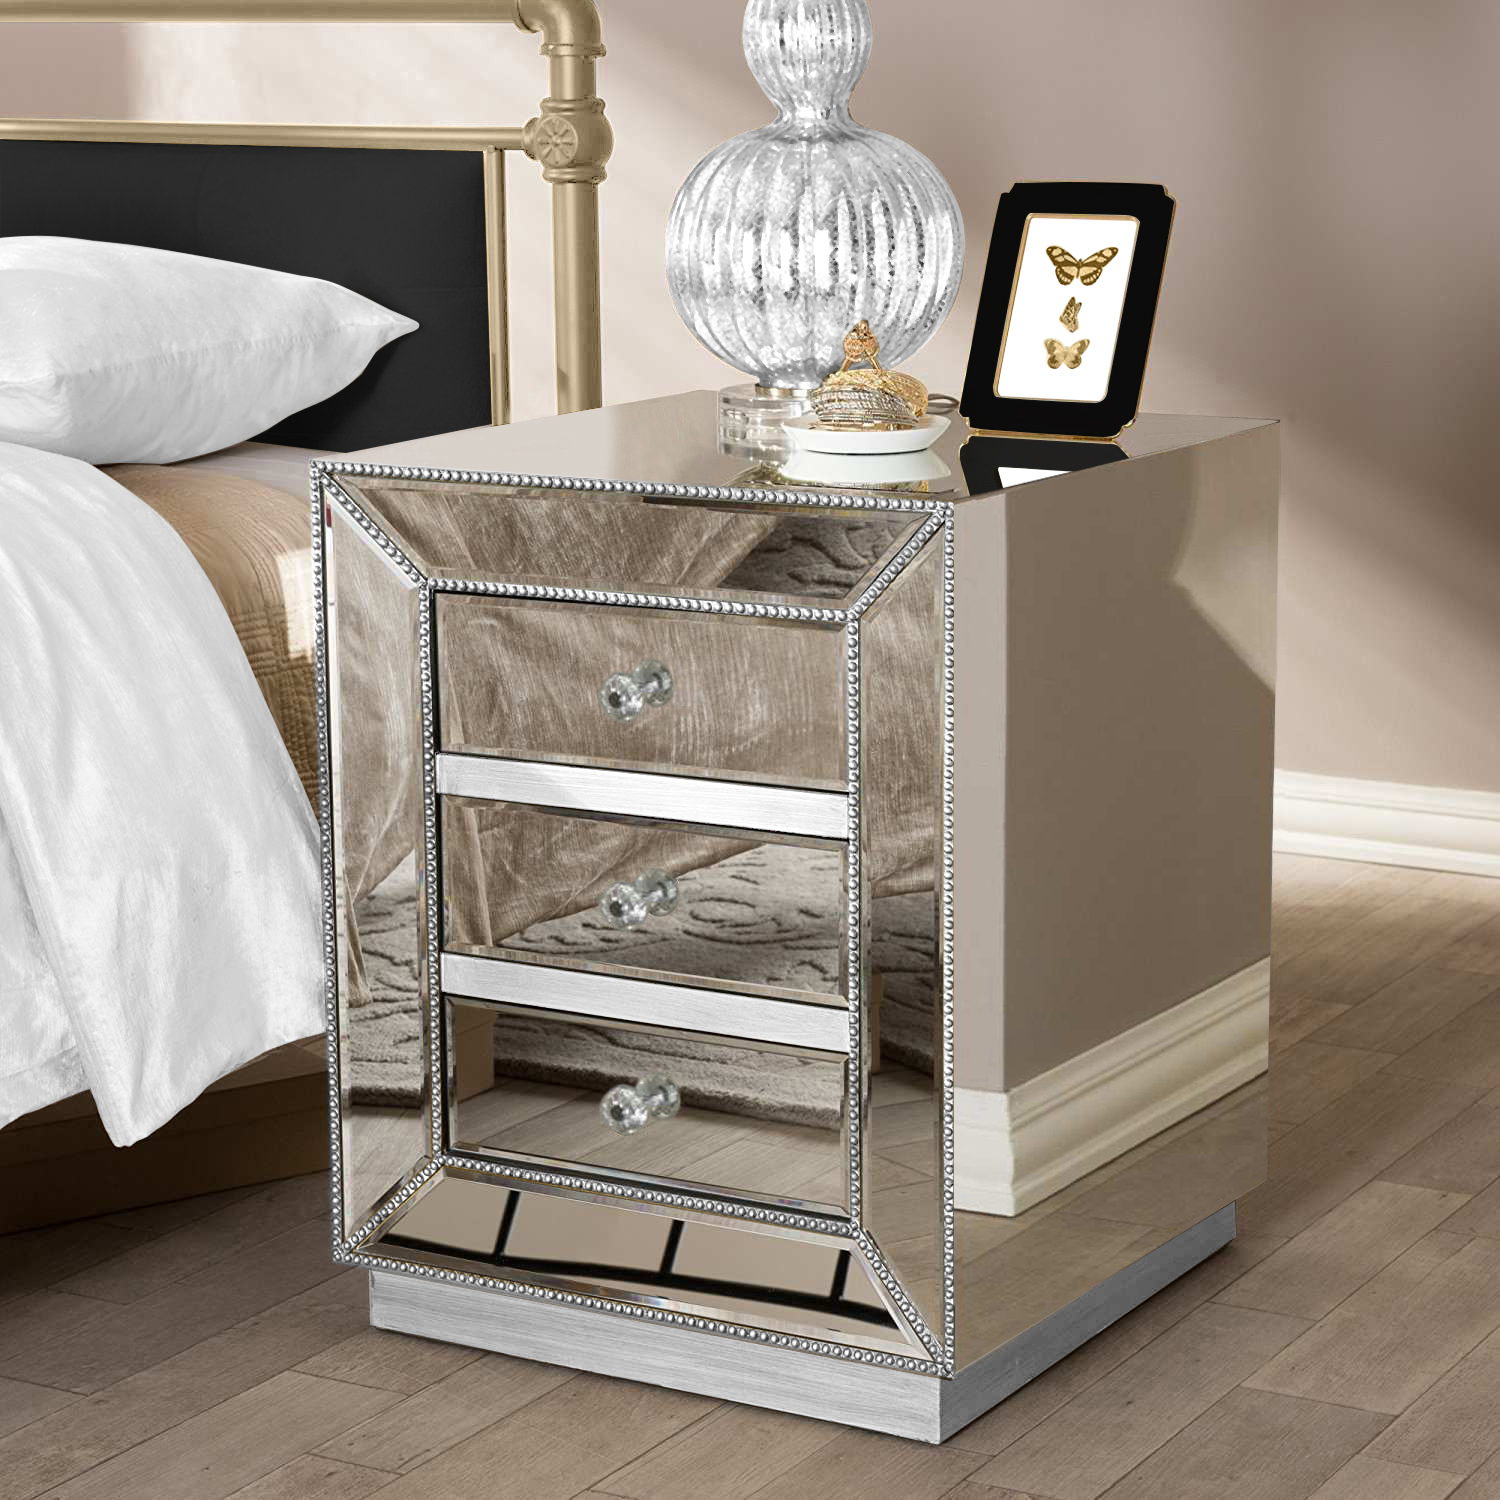 2 X Silver Beaded Mirrored Bedside Tables Nightstand 3 Drawer Mirror Furniture Ebay